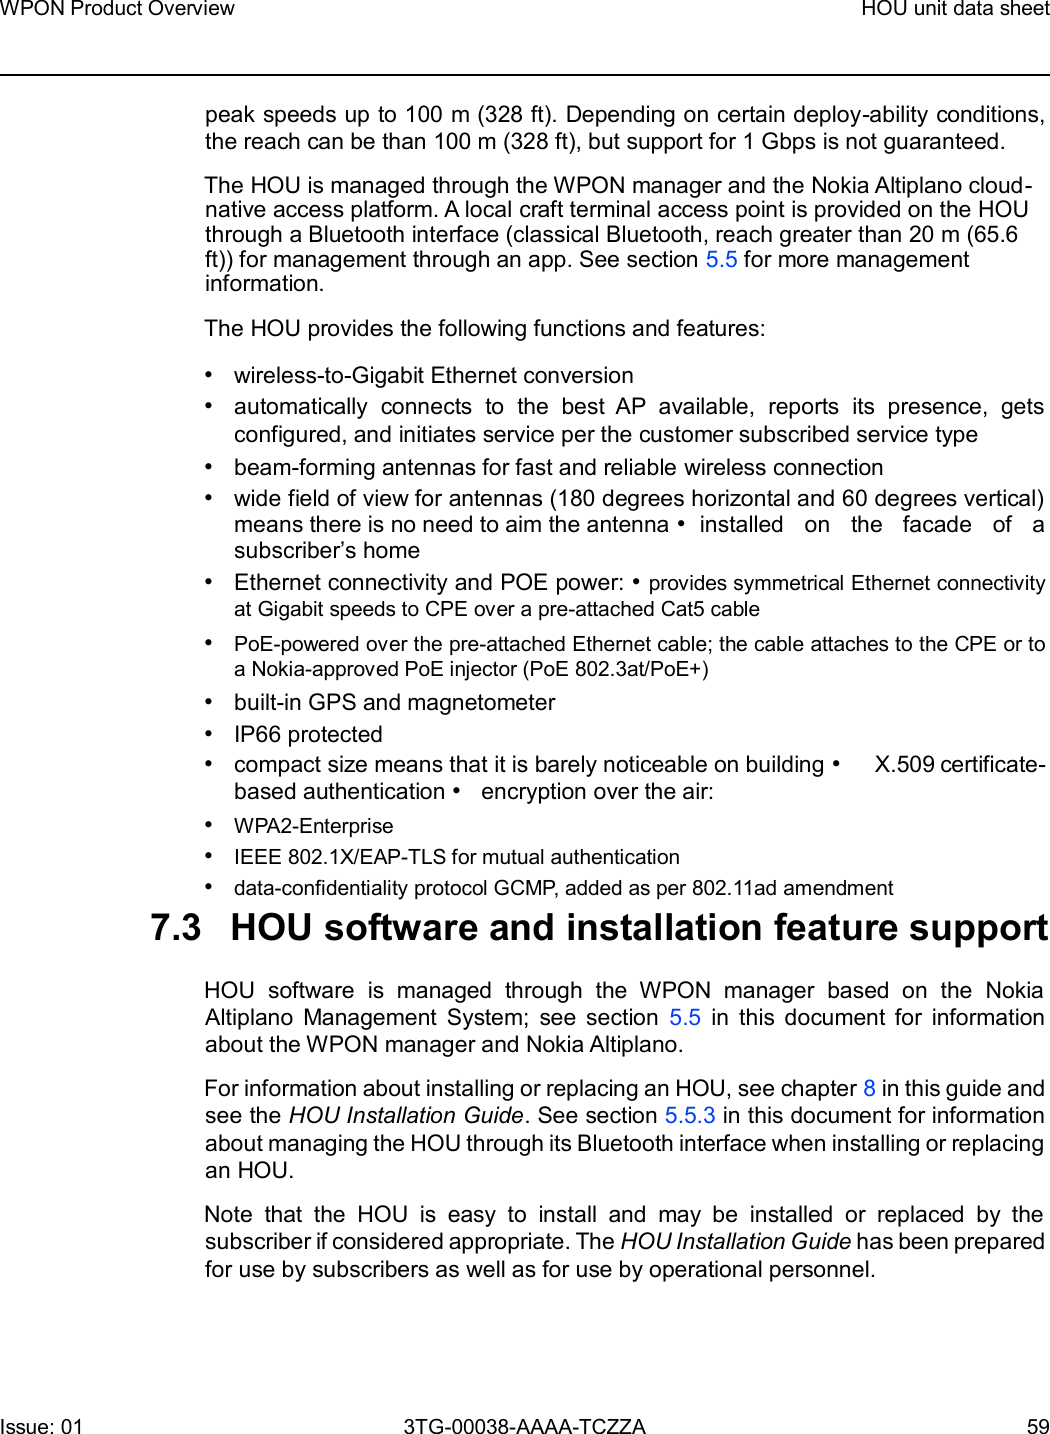 Page 59 of Nokia Bell 7577WPONAPED WPON User Manual WPON Product Overview